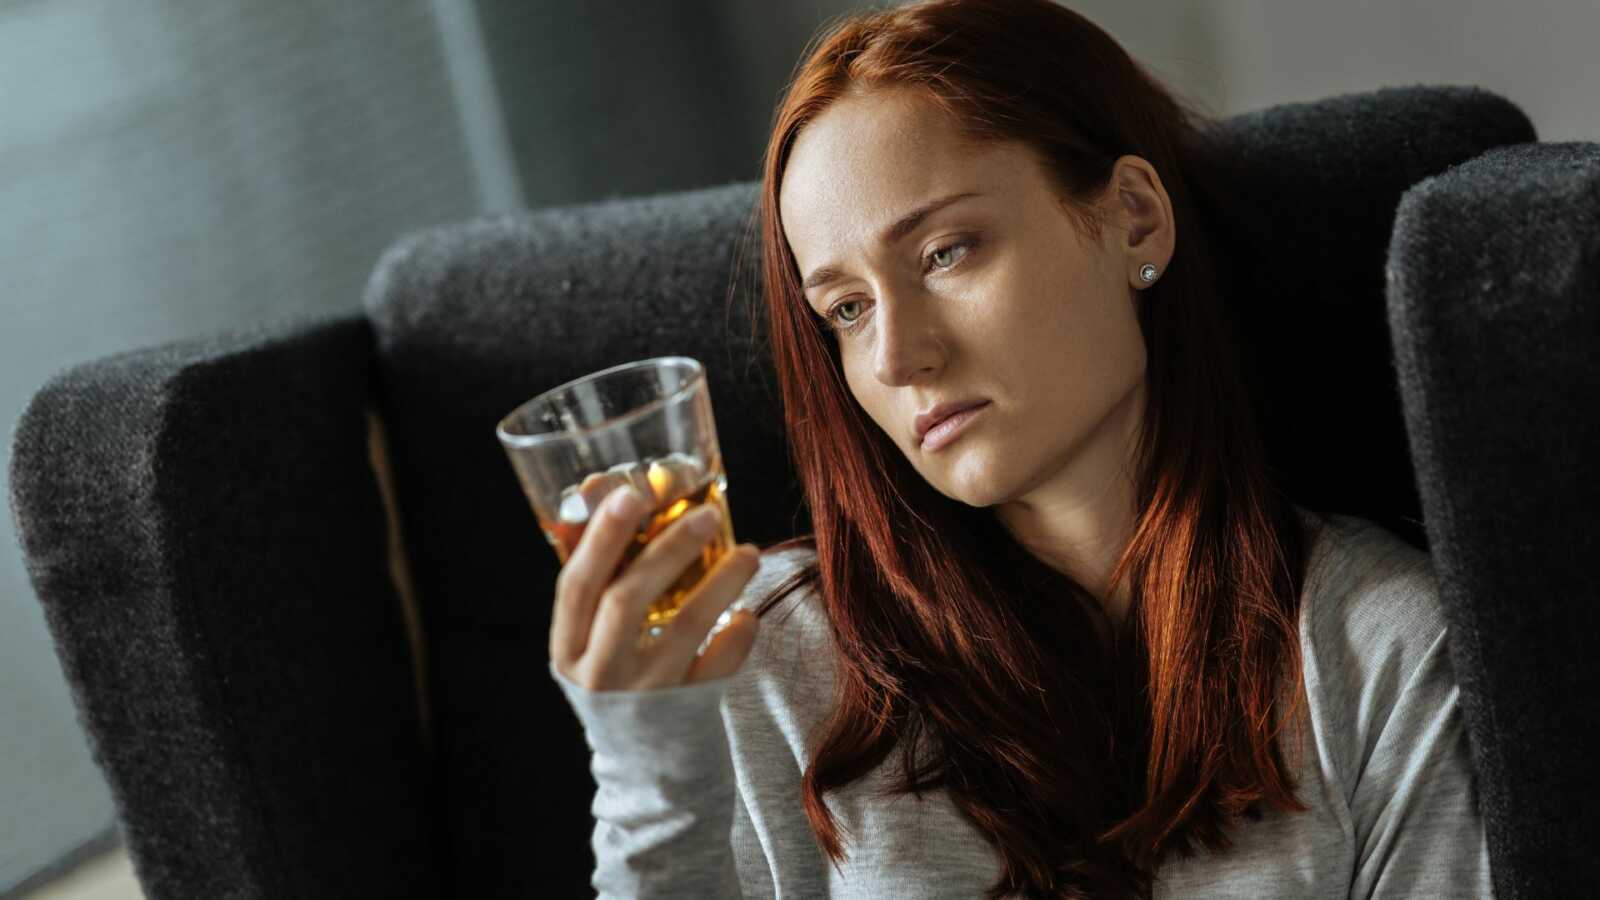 depressed woman holds up glass of alcohol and stares at it